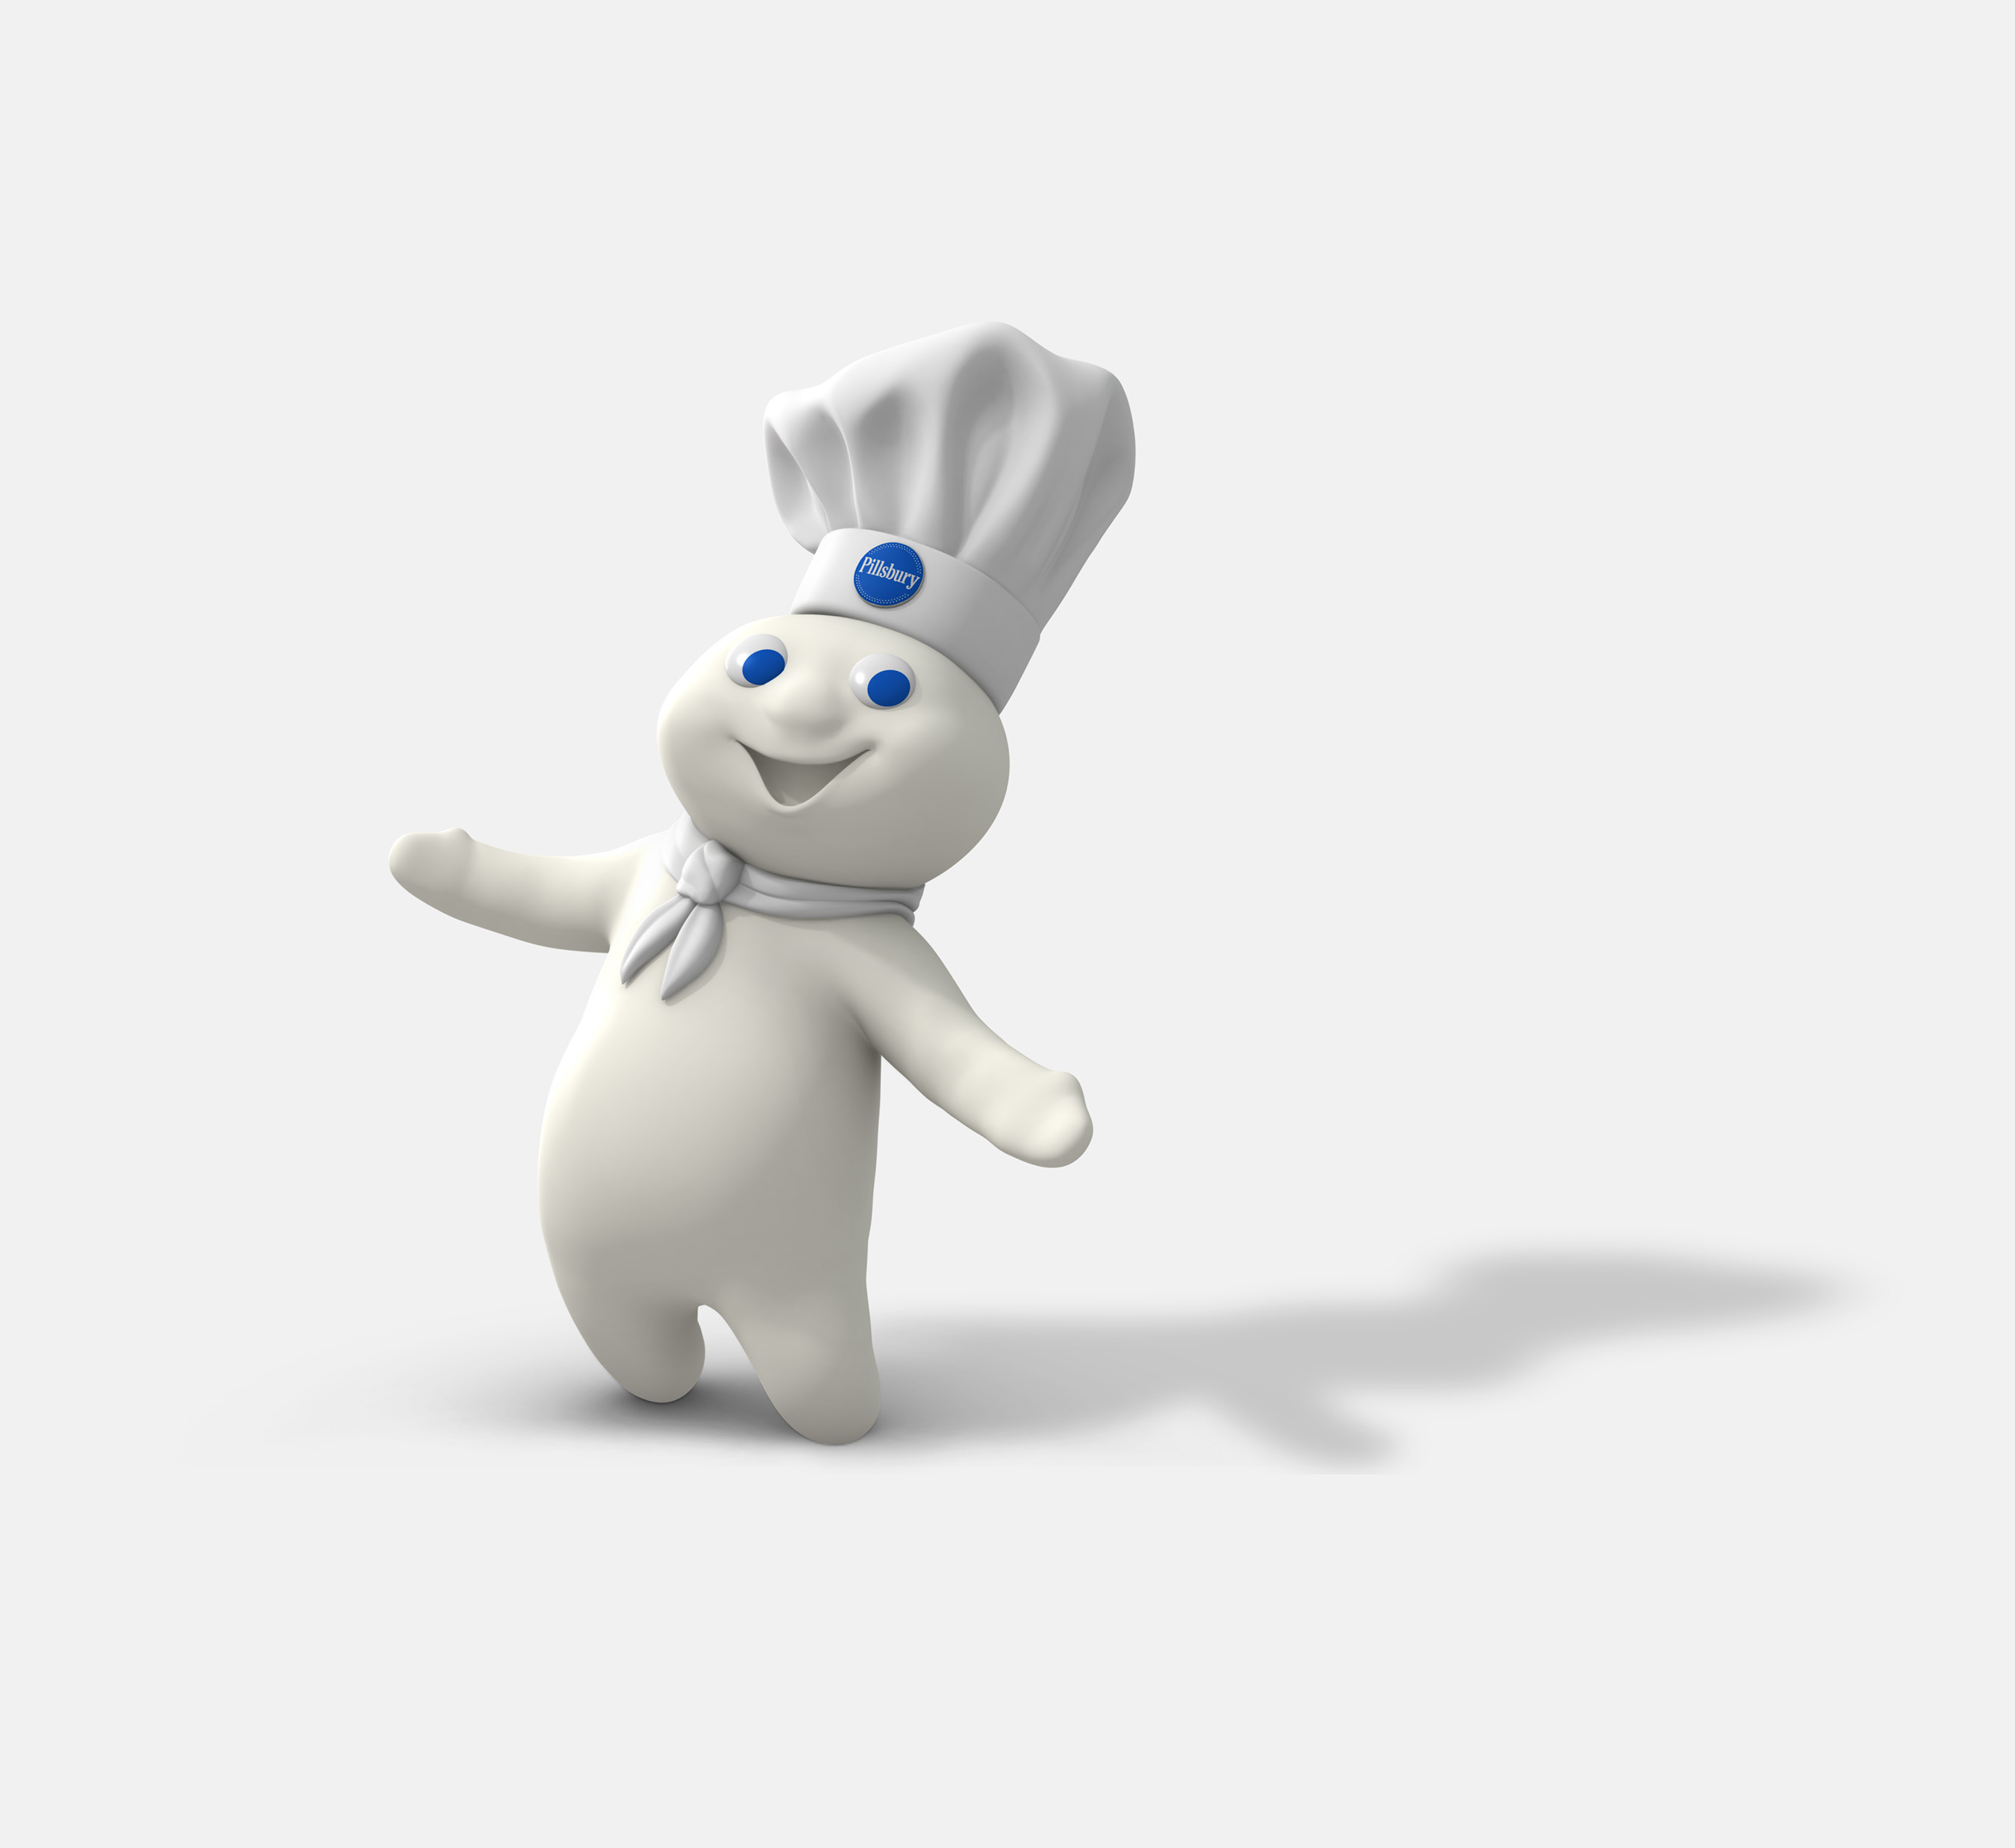 The Pillsbury Doughboy, with his iconic giggle, made his big debut in 1965